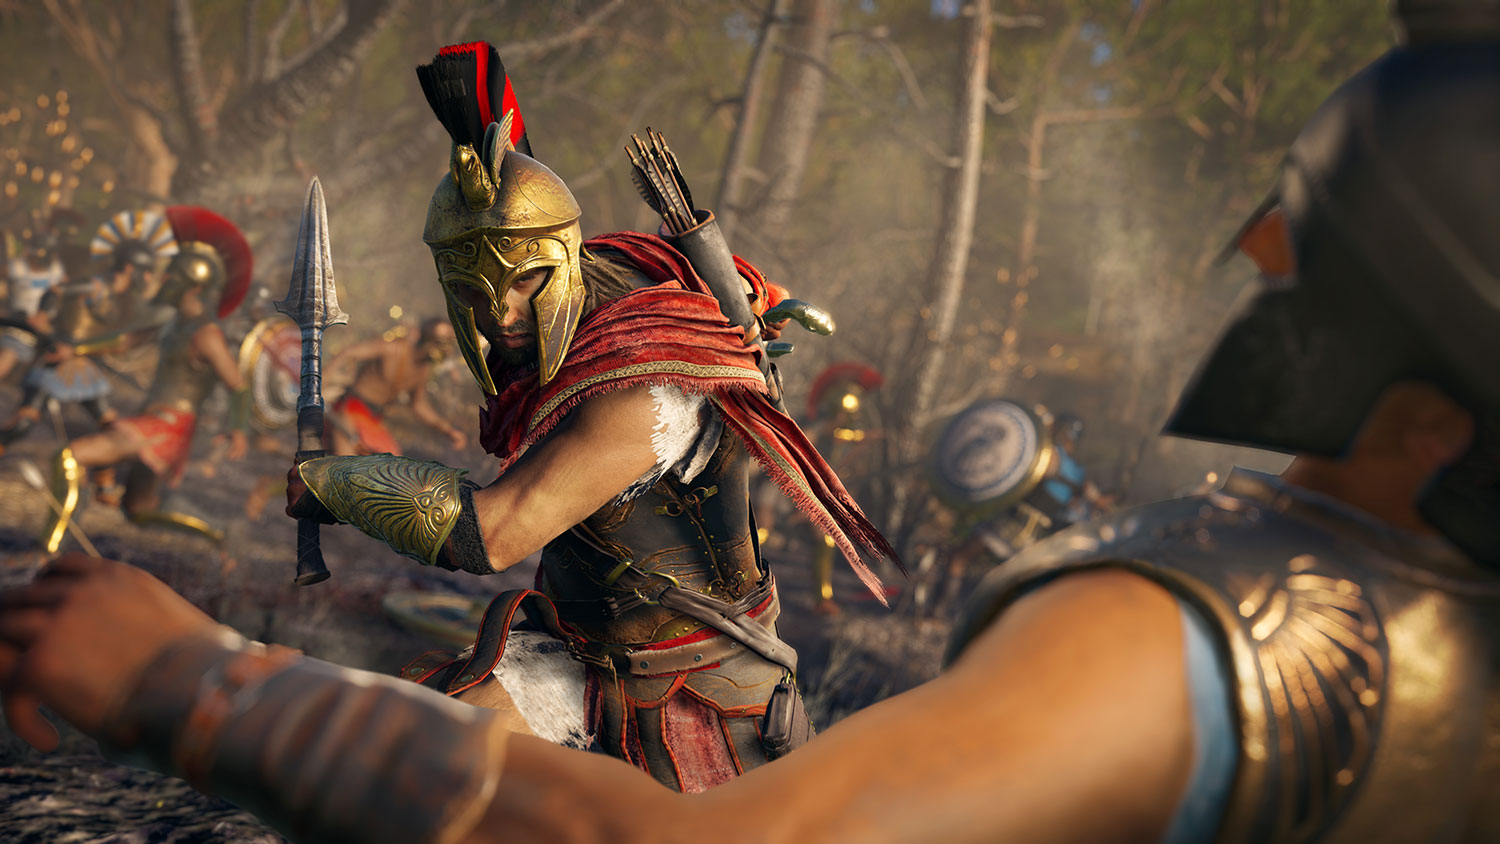 Assassin's Creed Odyssey' Review: As Gorgeous As It Is Monotonous